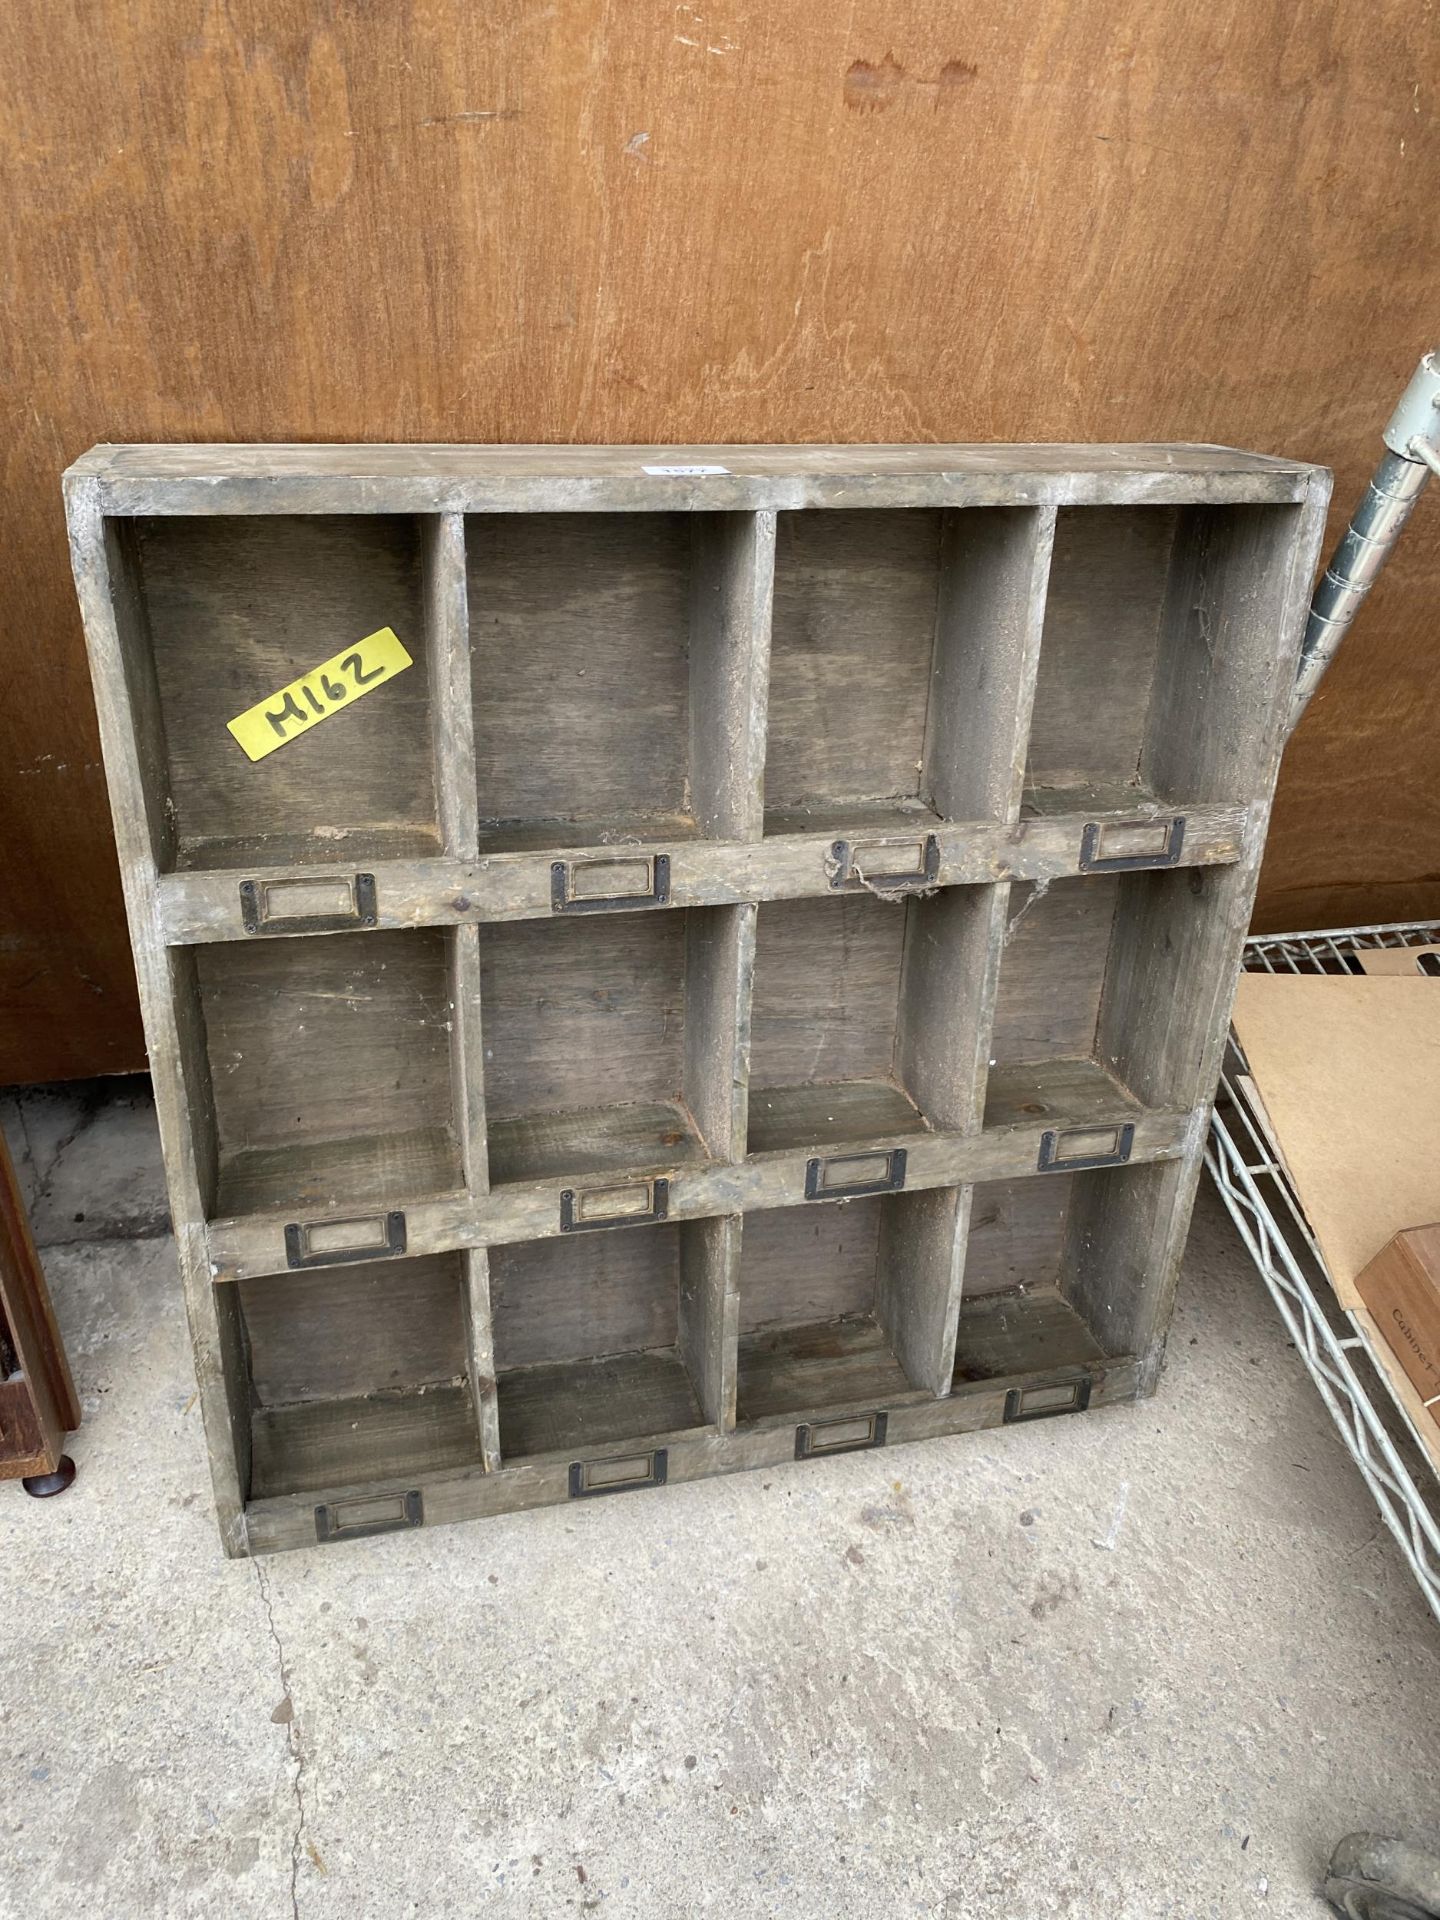 A VINTAGE 12 SECTION WOODEN PIGEON HOLE